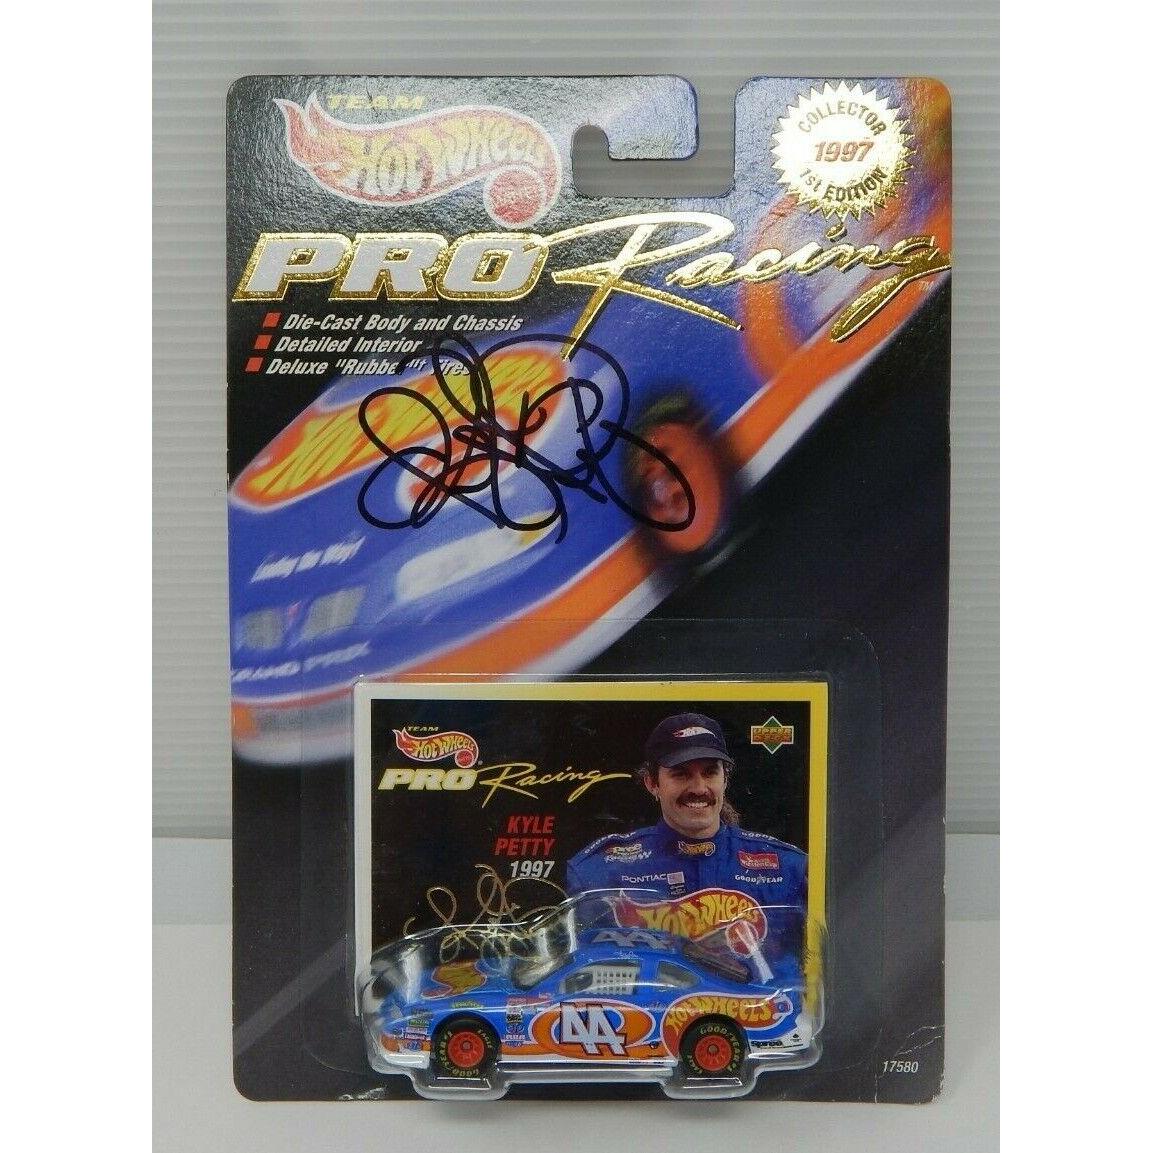 Hot Wheels Pro Racing 1997 Kyle Petty Signed